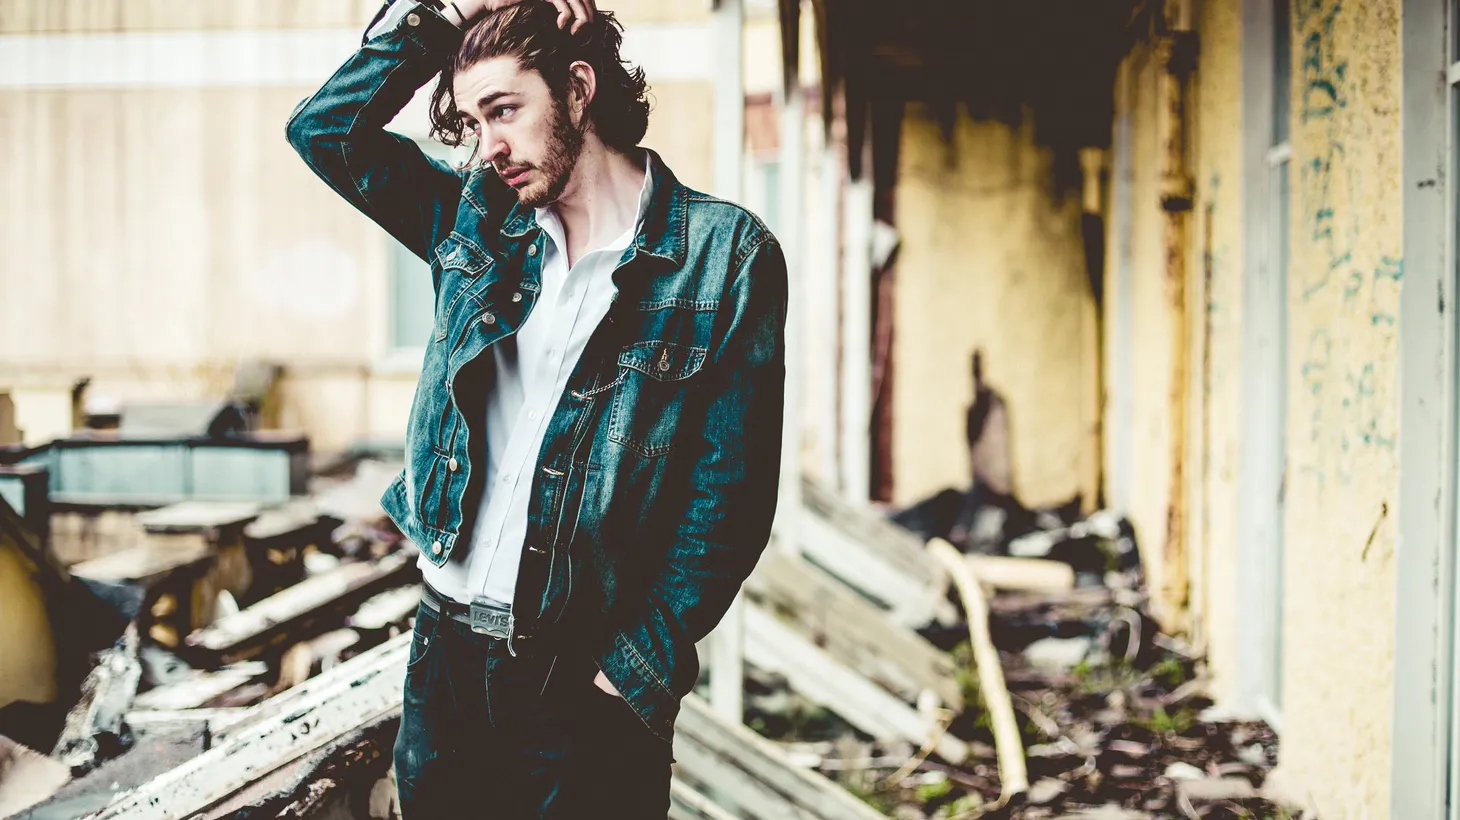 Irish singer Hozier is poised for a big year. His track "Take Me To Church" has become a staple on KCRW's playlists...